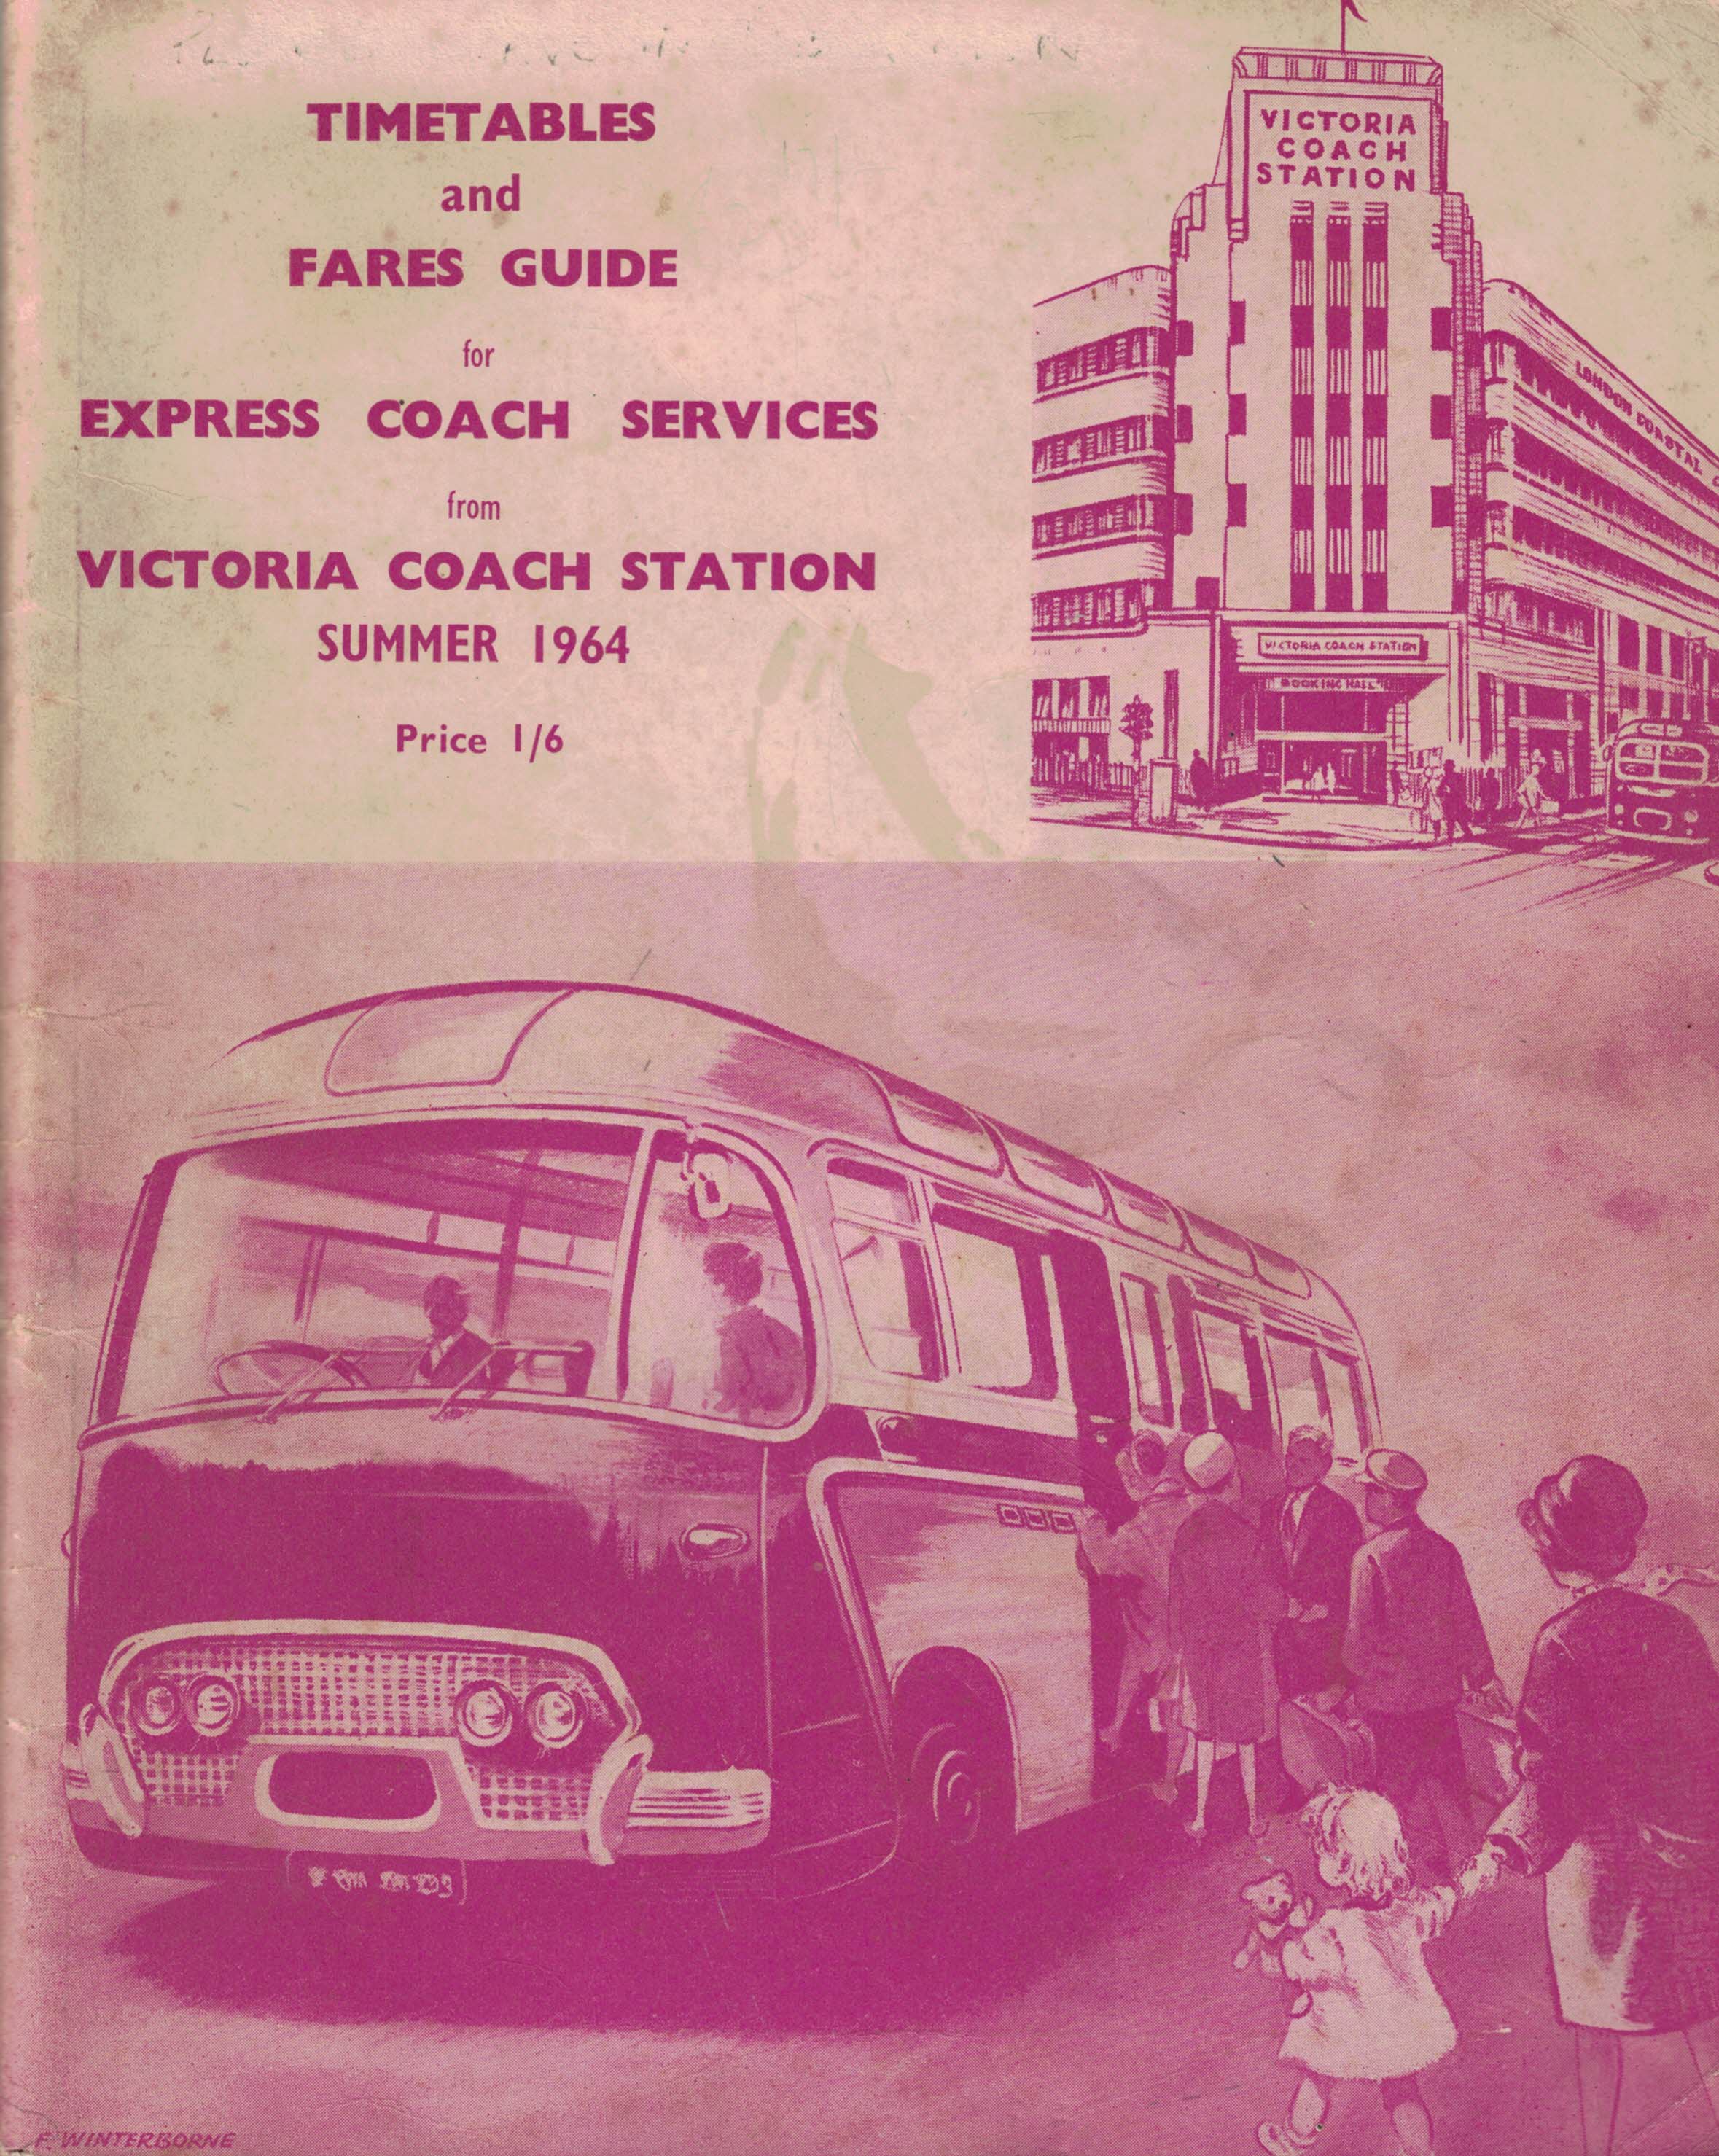 Timetables and Fares Guide for Express Coach Services from Victoria Coach Station. Summer 1964.